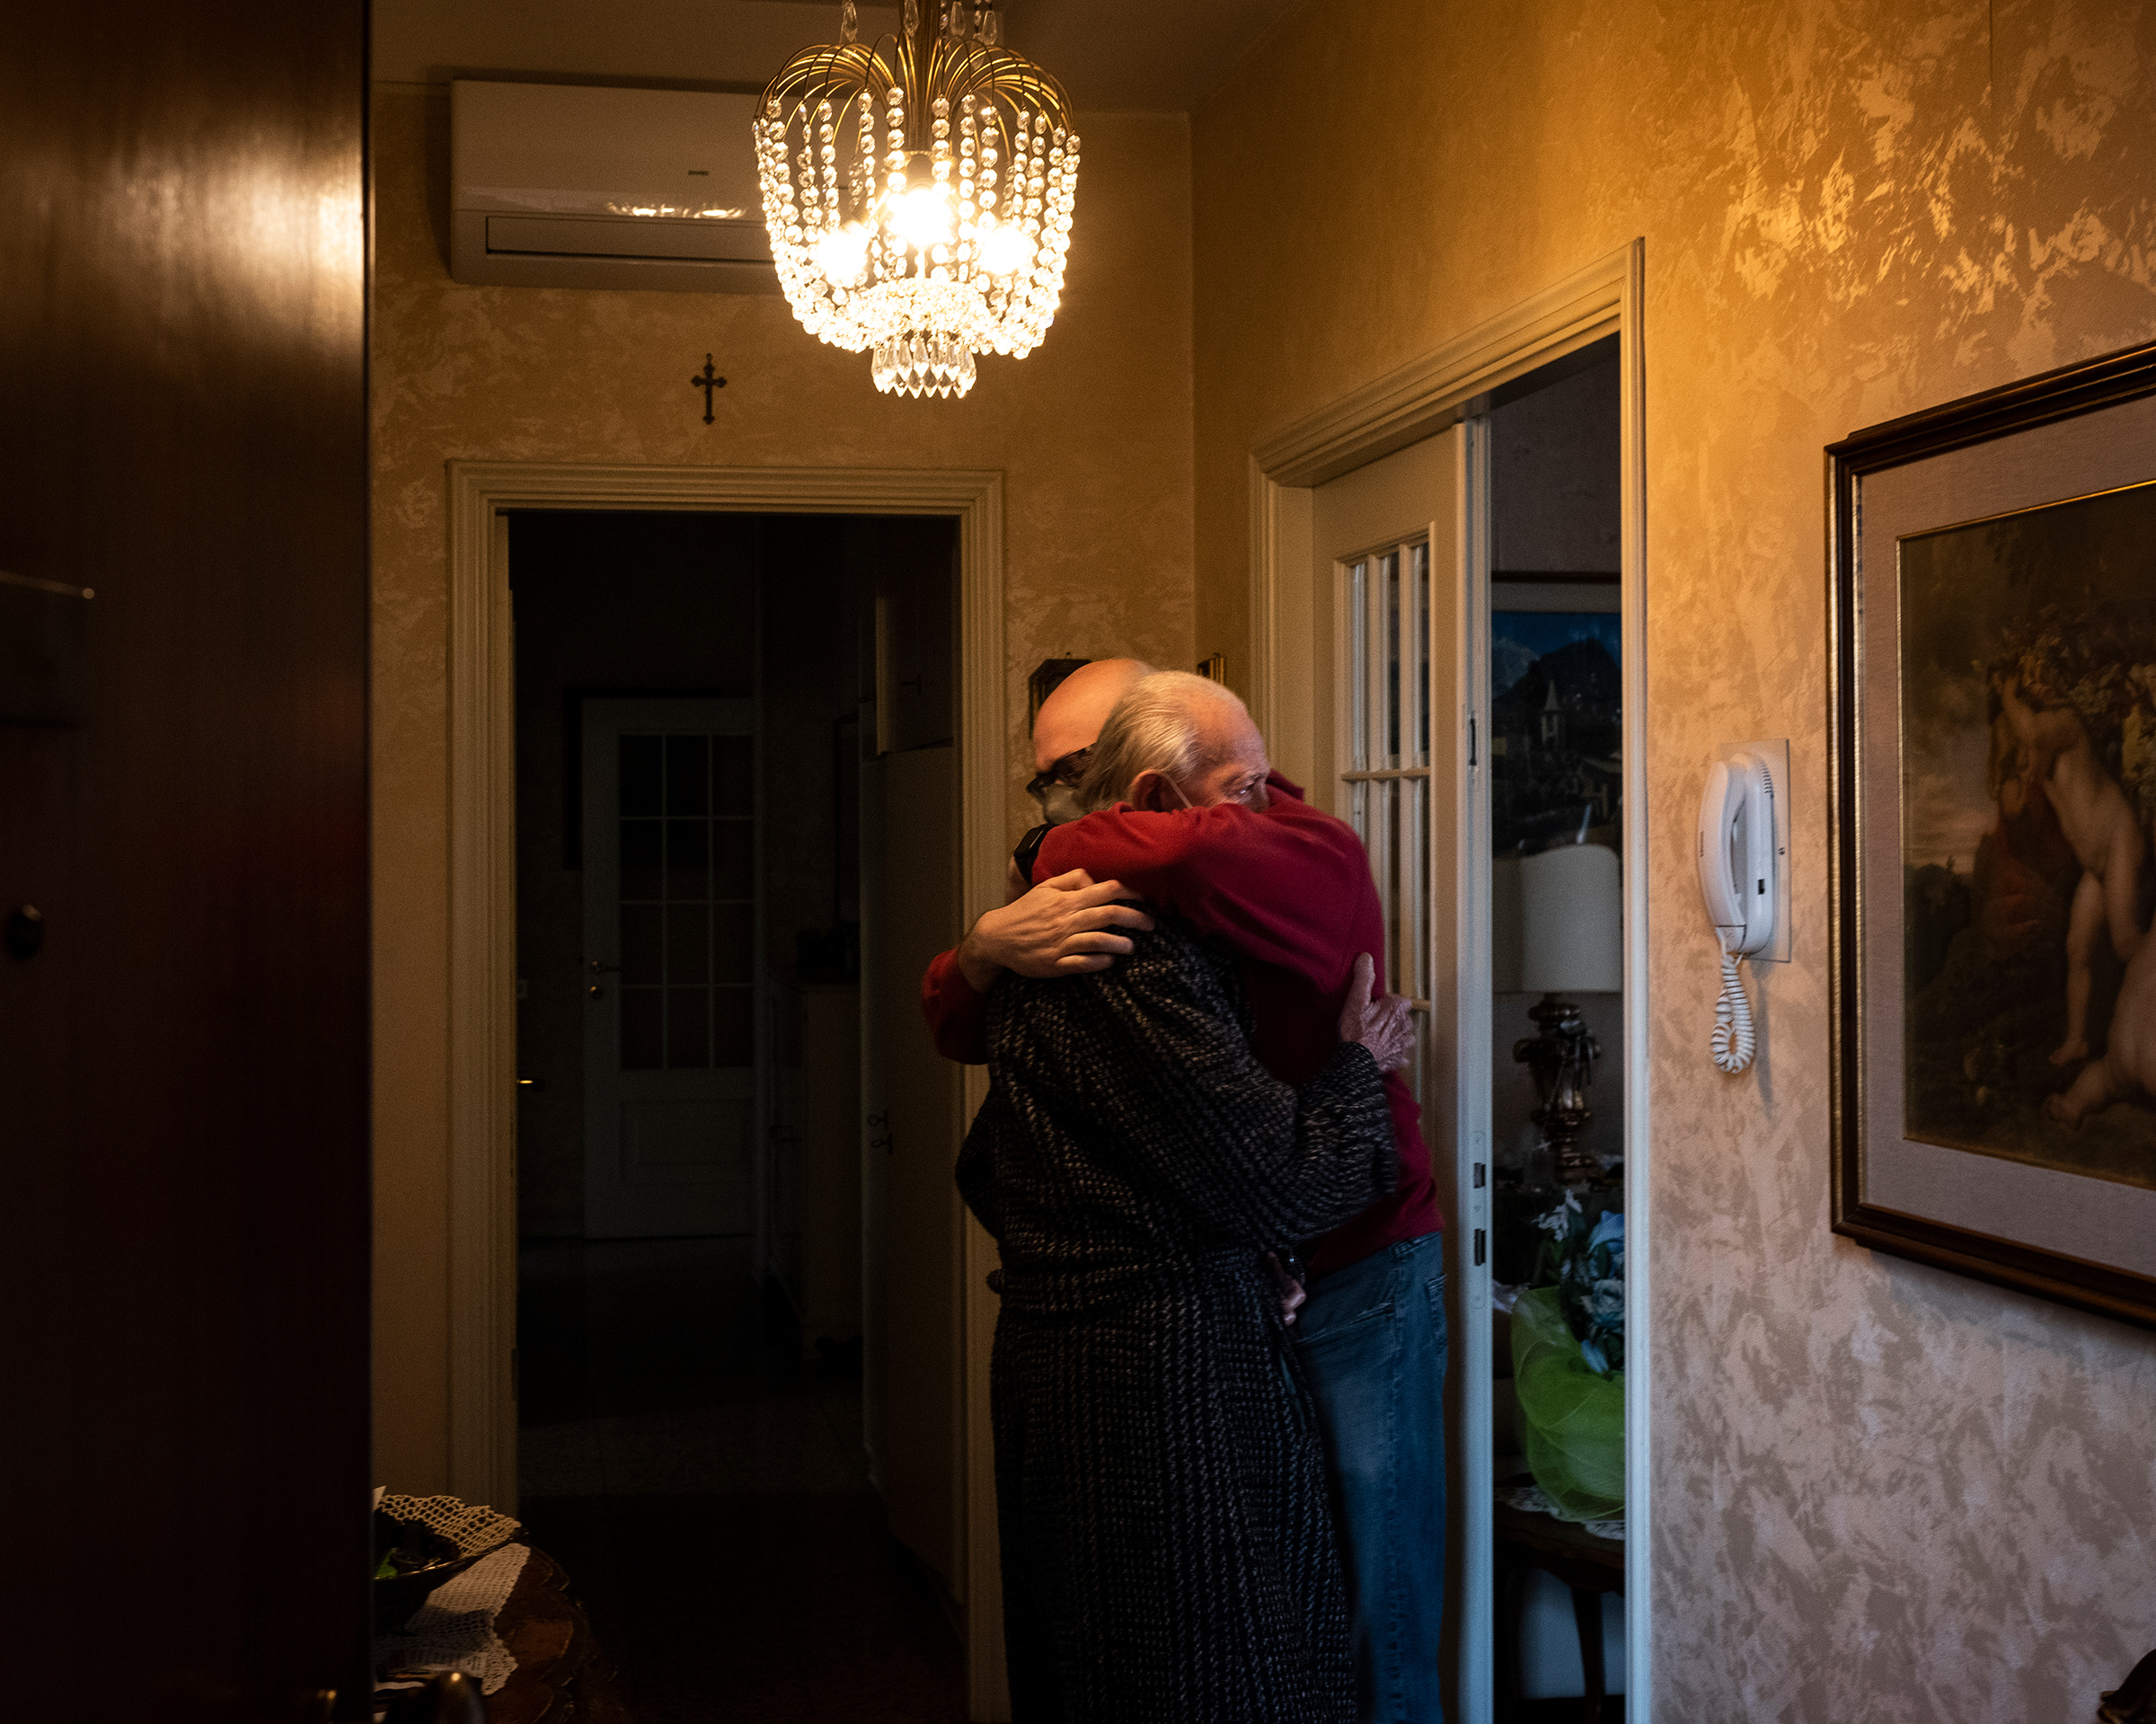 A son hugs his father before the older man, a suspected case of COVID-19, is hospitalized in Piacenza. (Lorenzo Meloni—Magnum Photos for TIME)